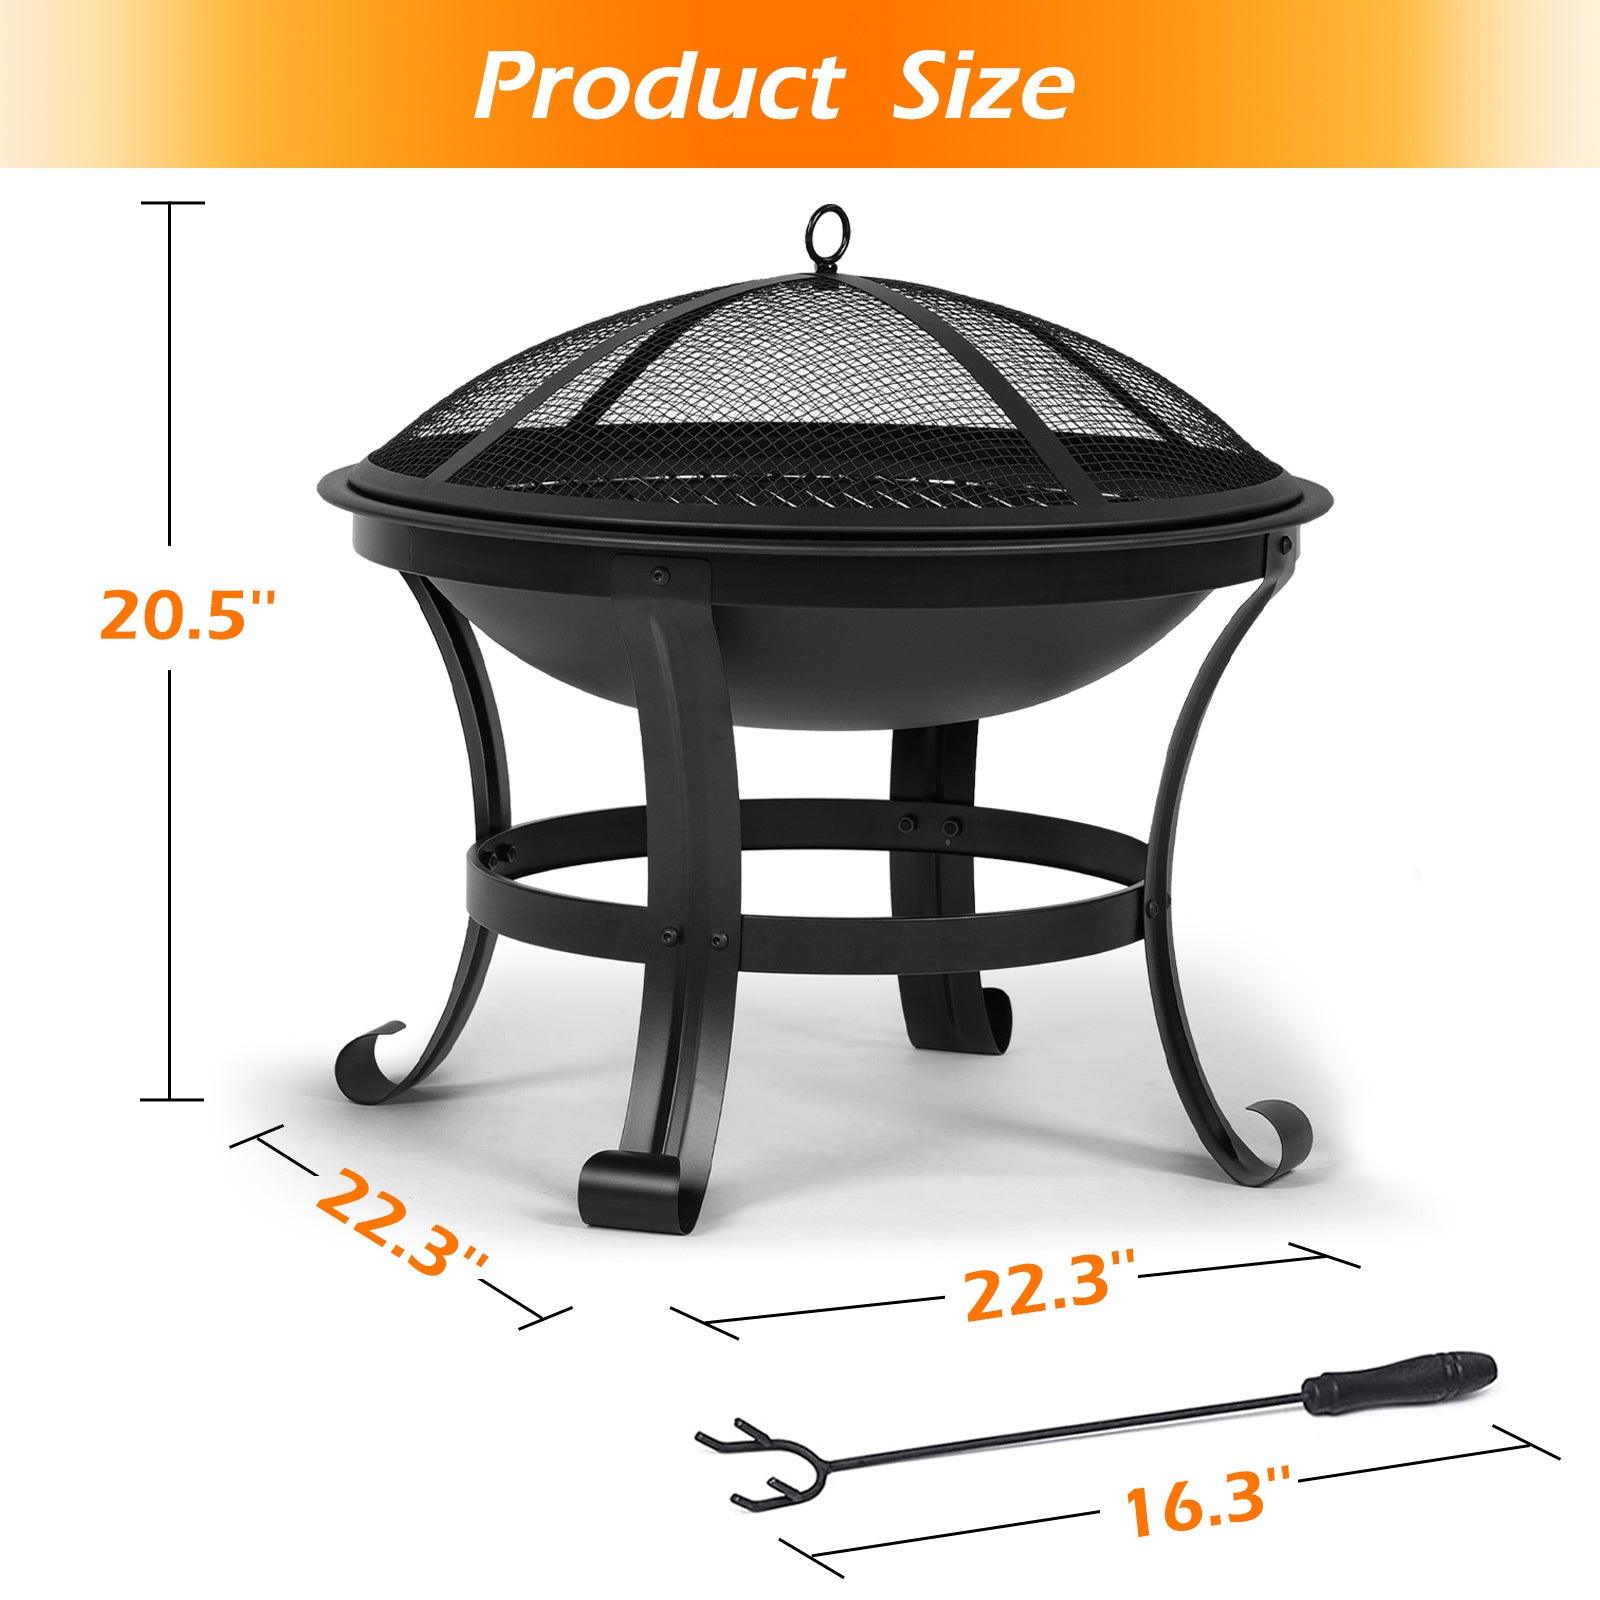 Fire Pit with Grill for Garden 56cm 3 in 1 - Charming Spaces